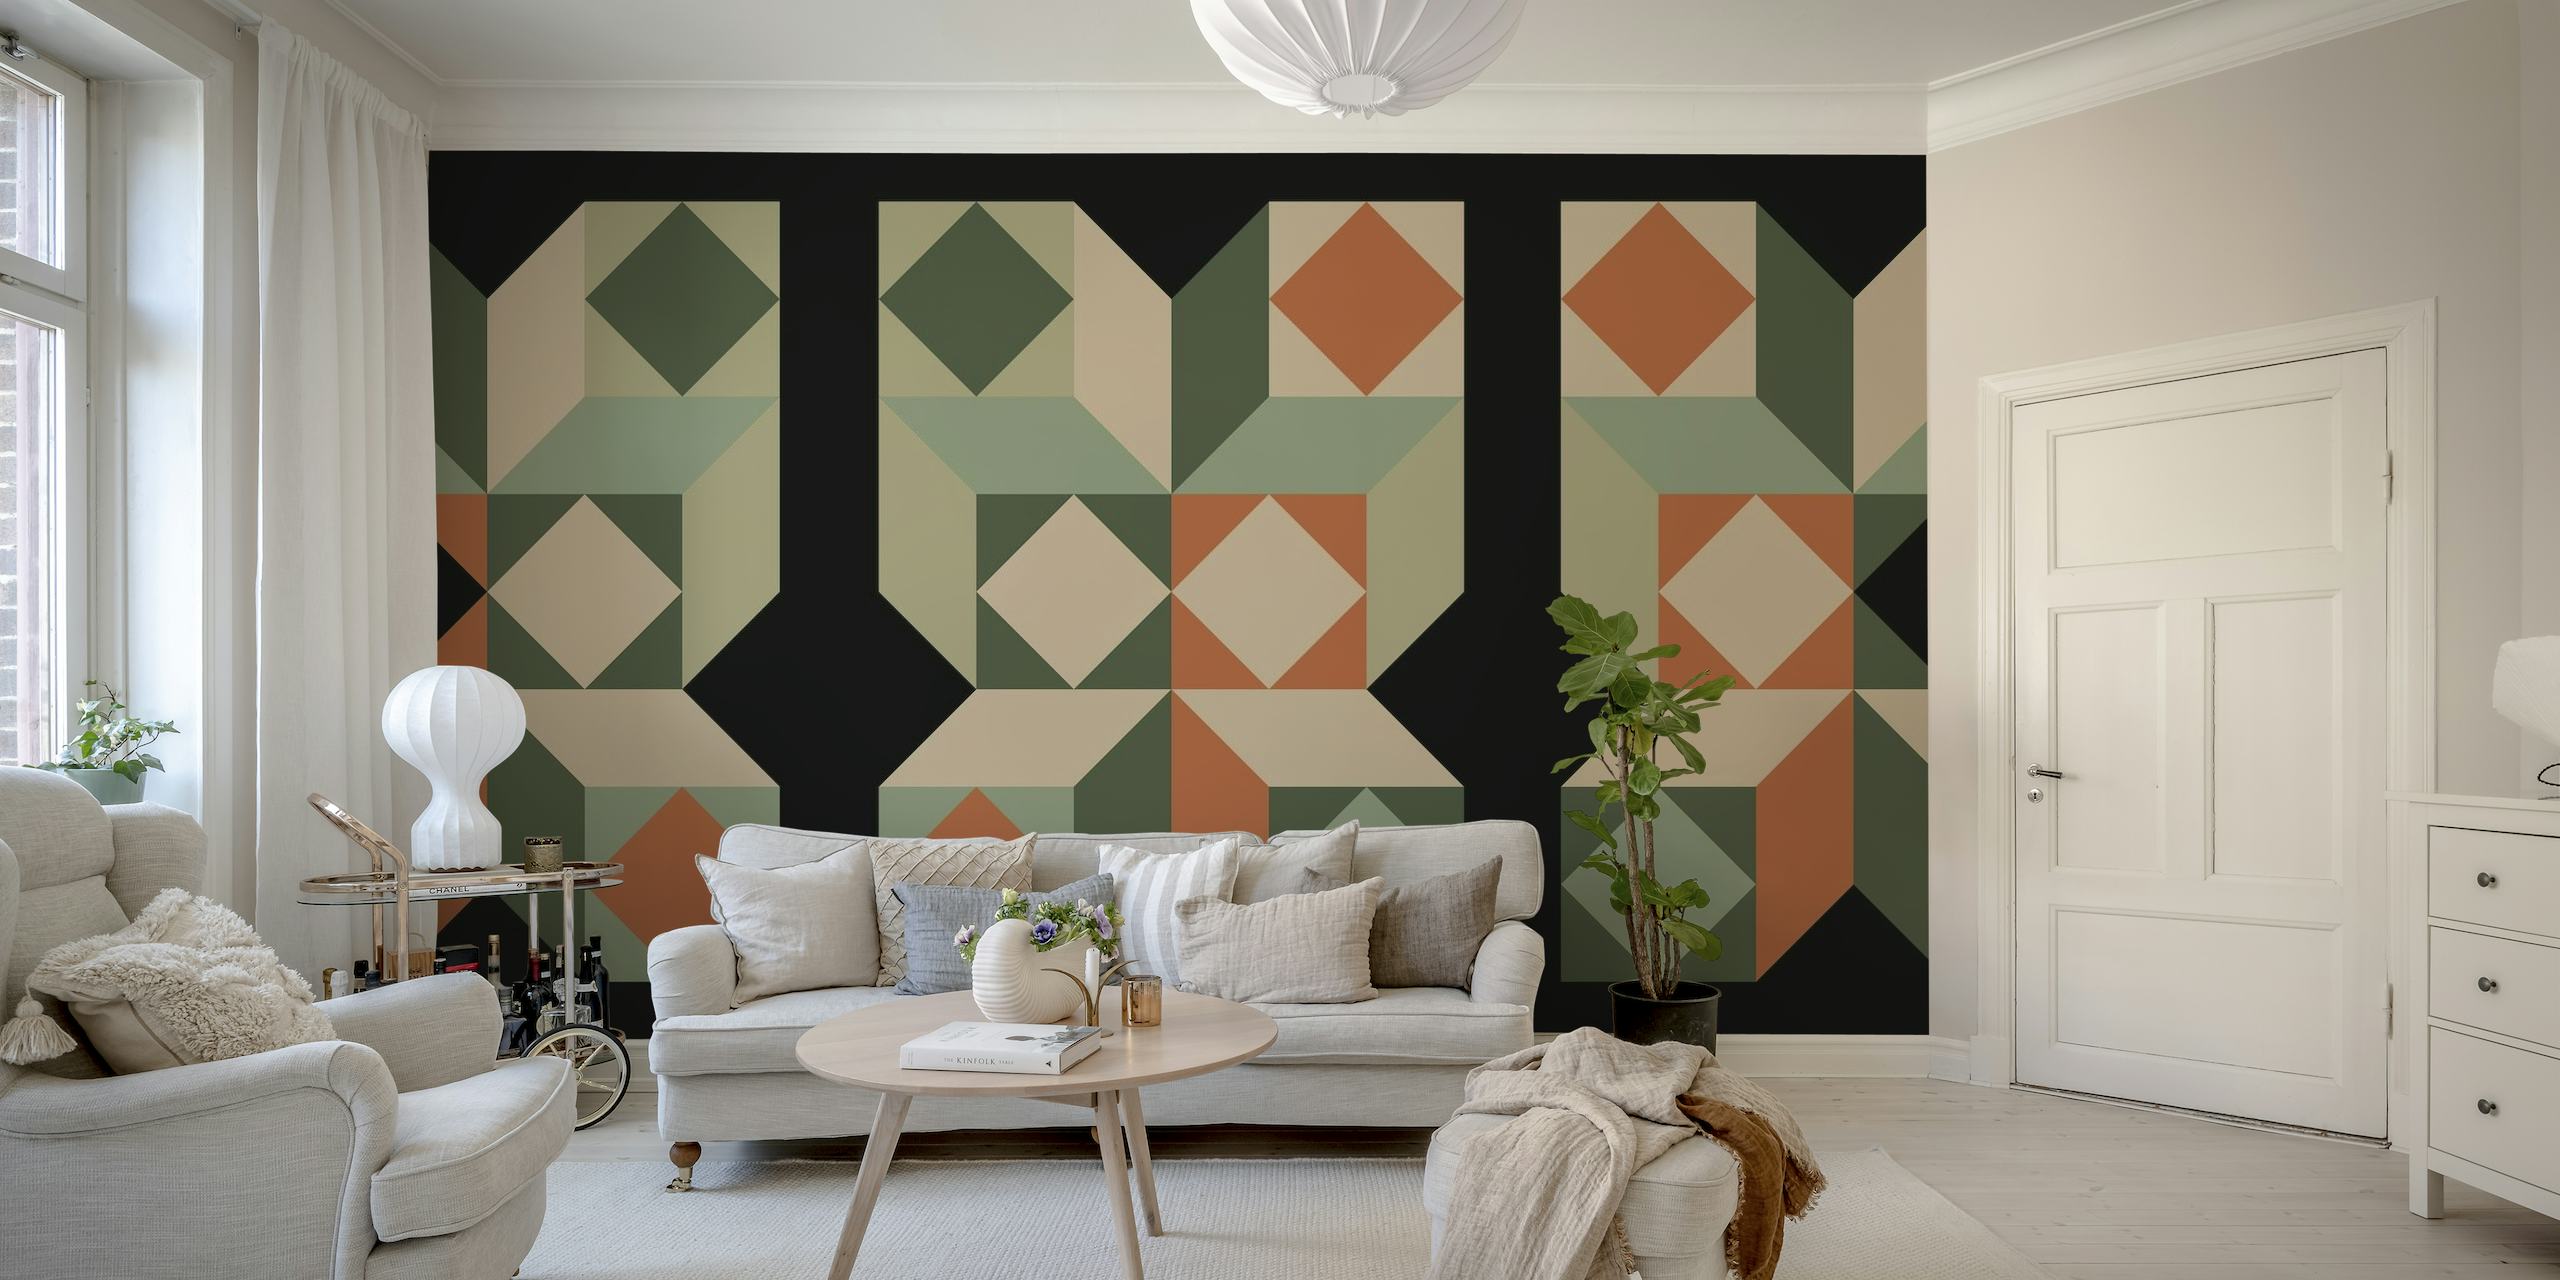 Midcentury Bauhaus inspired wall mural with geometric patterns in green, orange, and neutral tones.